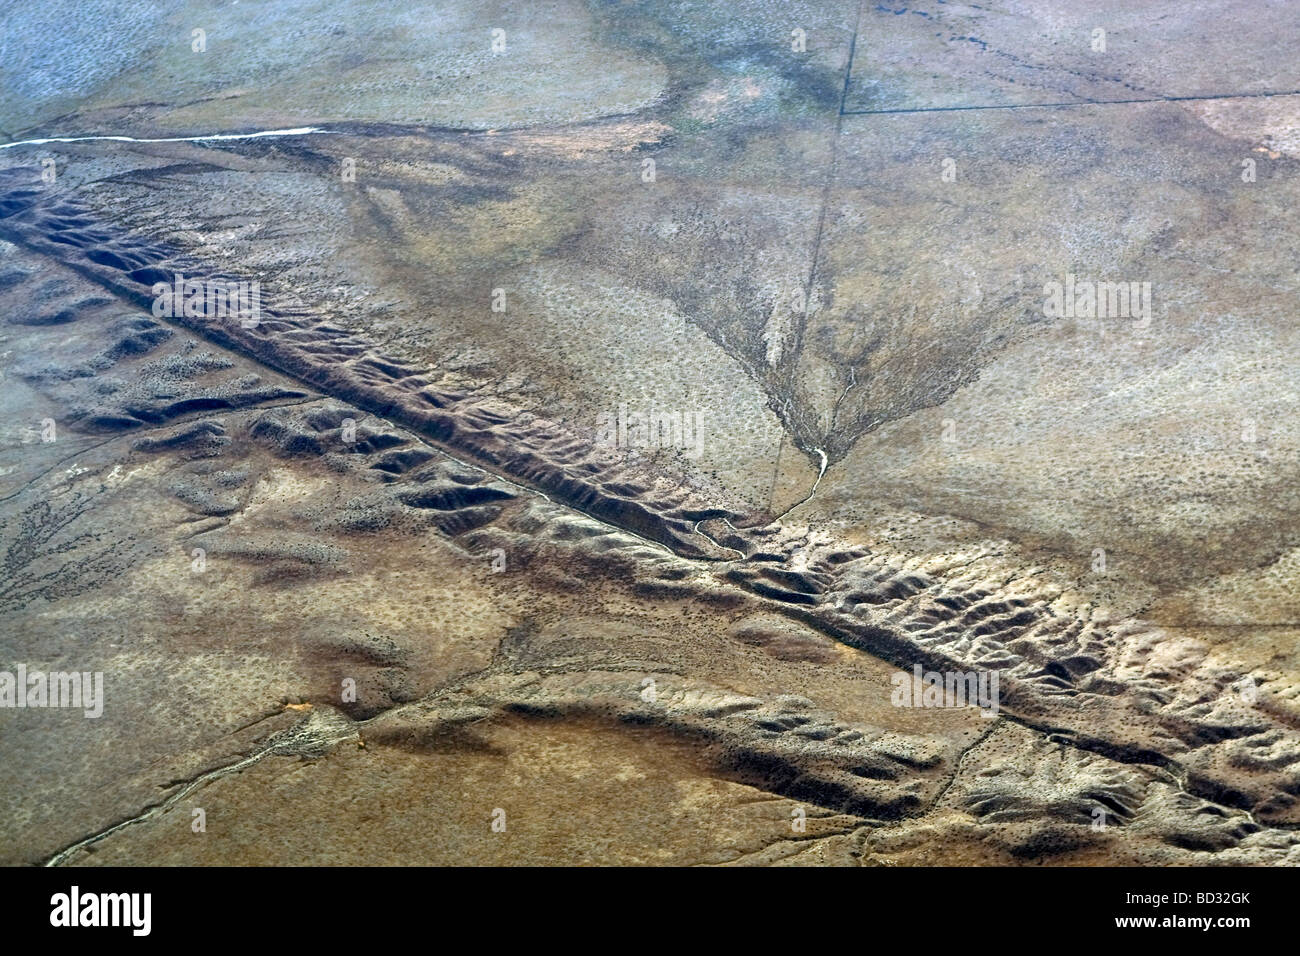 Aerial view of the San Andreas Fault in the Carrizo Plain California. Stock Photo